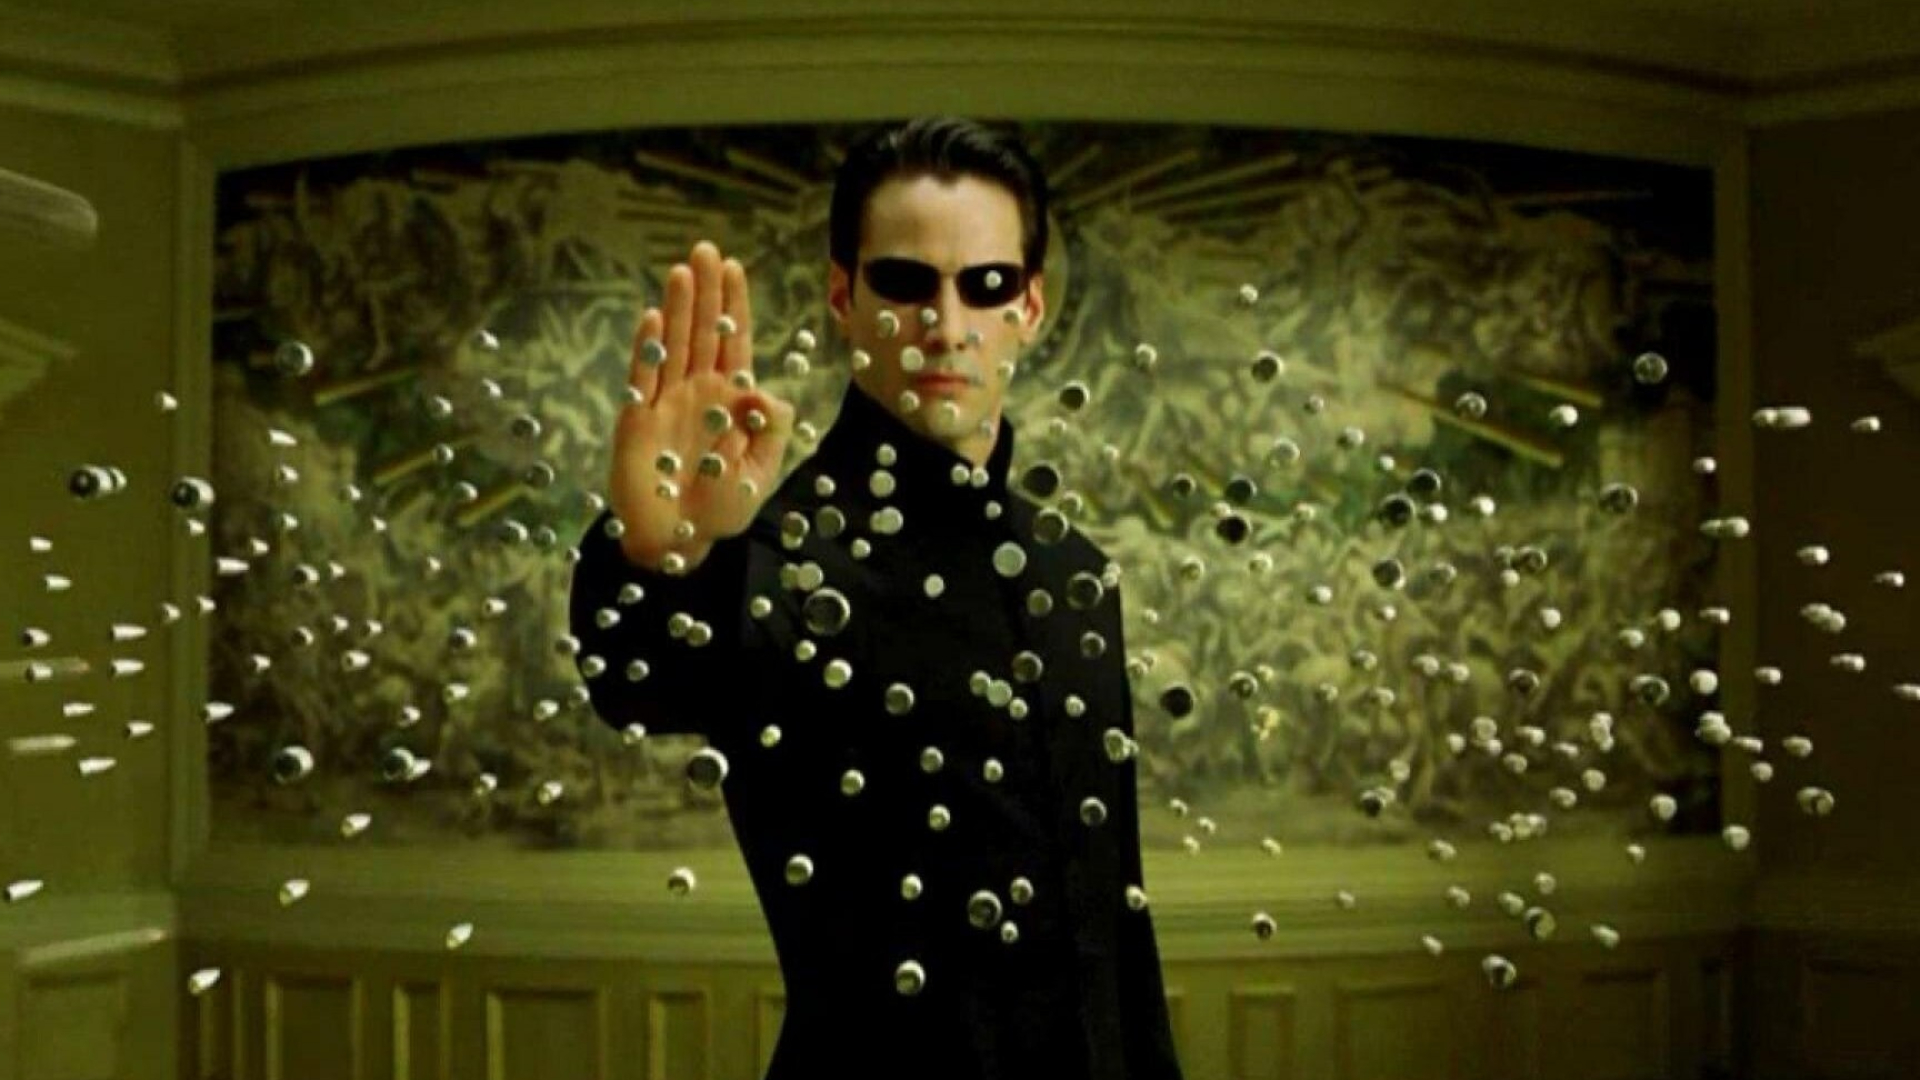 Matrix Franchise: Neo, The series features a cyberpunk story of the technological fall of humanity. 1920x1080 Full HD Wallpaper.